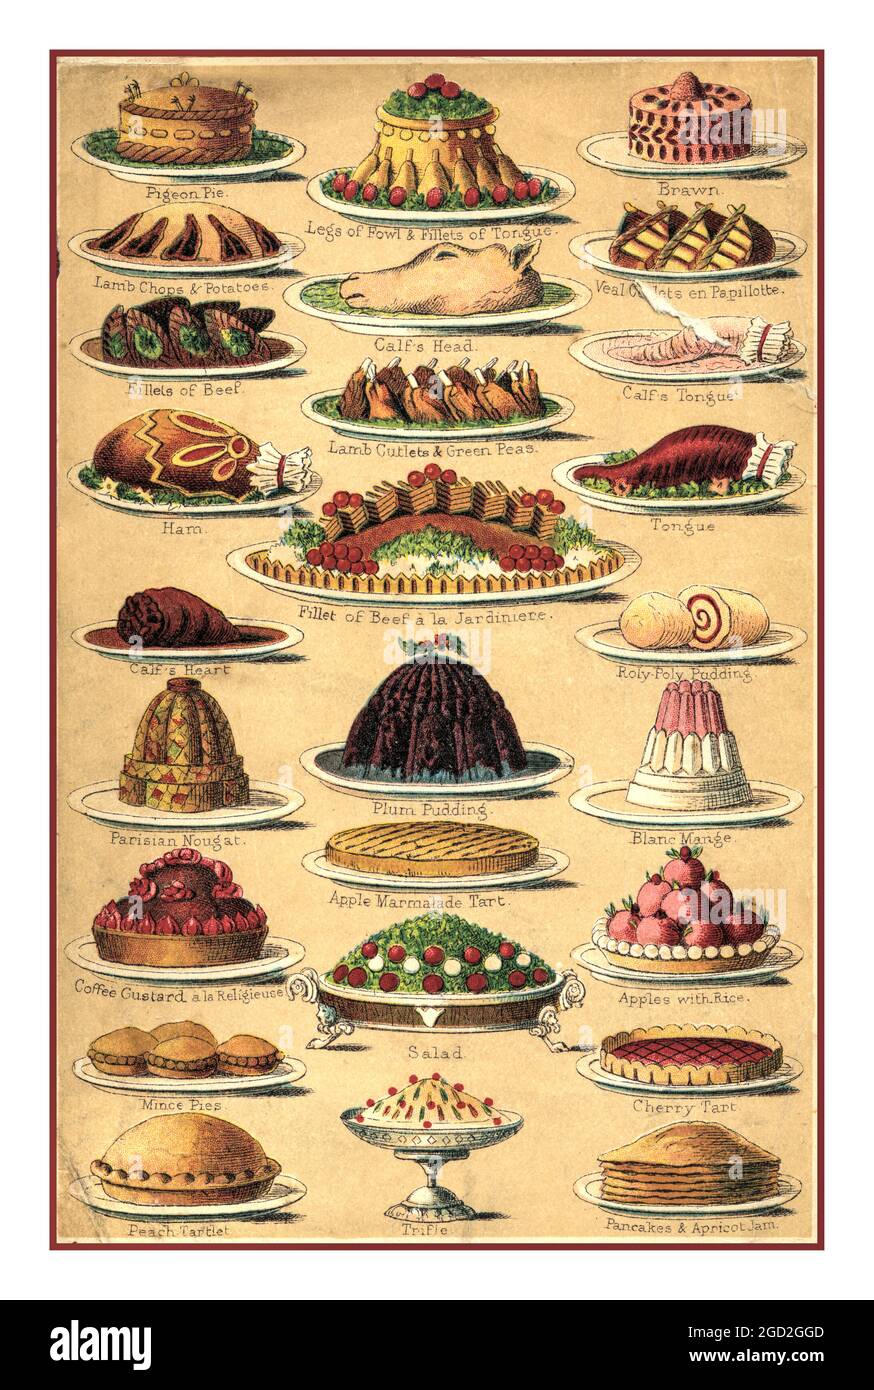 1890's Colour lithograph from Mrs Beetons Cookery Book illustrating variety of Christmas entertaining Victorian foods including Pies Puddings and Meats. Enhanced and remastered high resolution scan from original lithographic colour plate in 1890's Mrs Beeton's Cookery Book illustrating a variety of popular Victorian foodstuffs Stock Photo